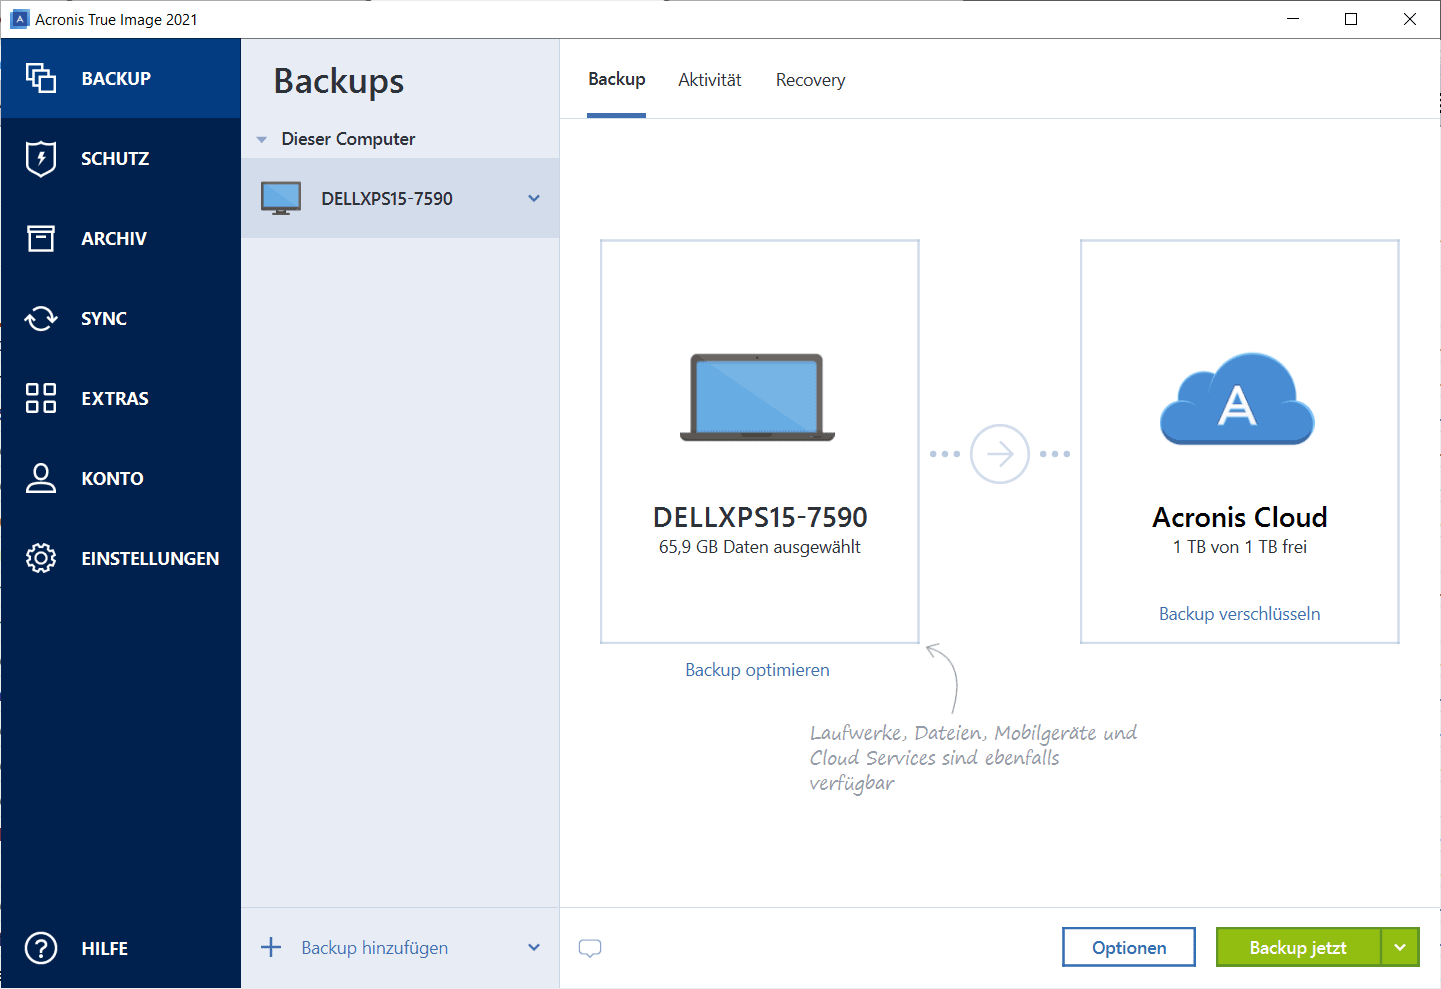 a free update is required for acronis true image